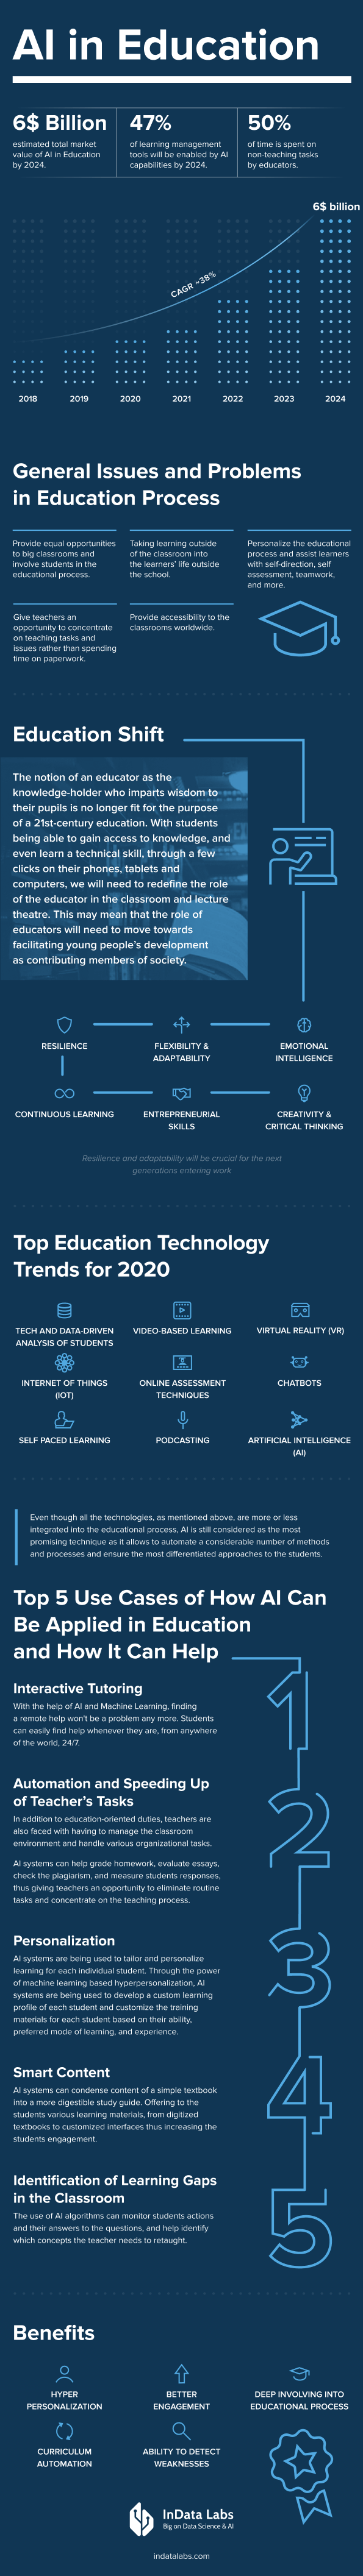 AI in education infographic